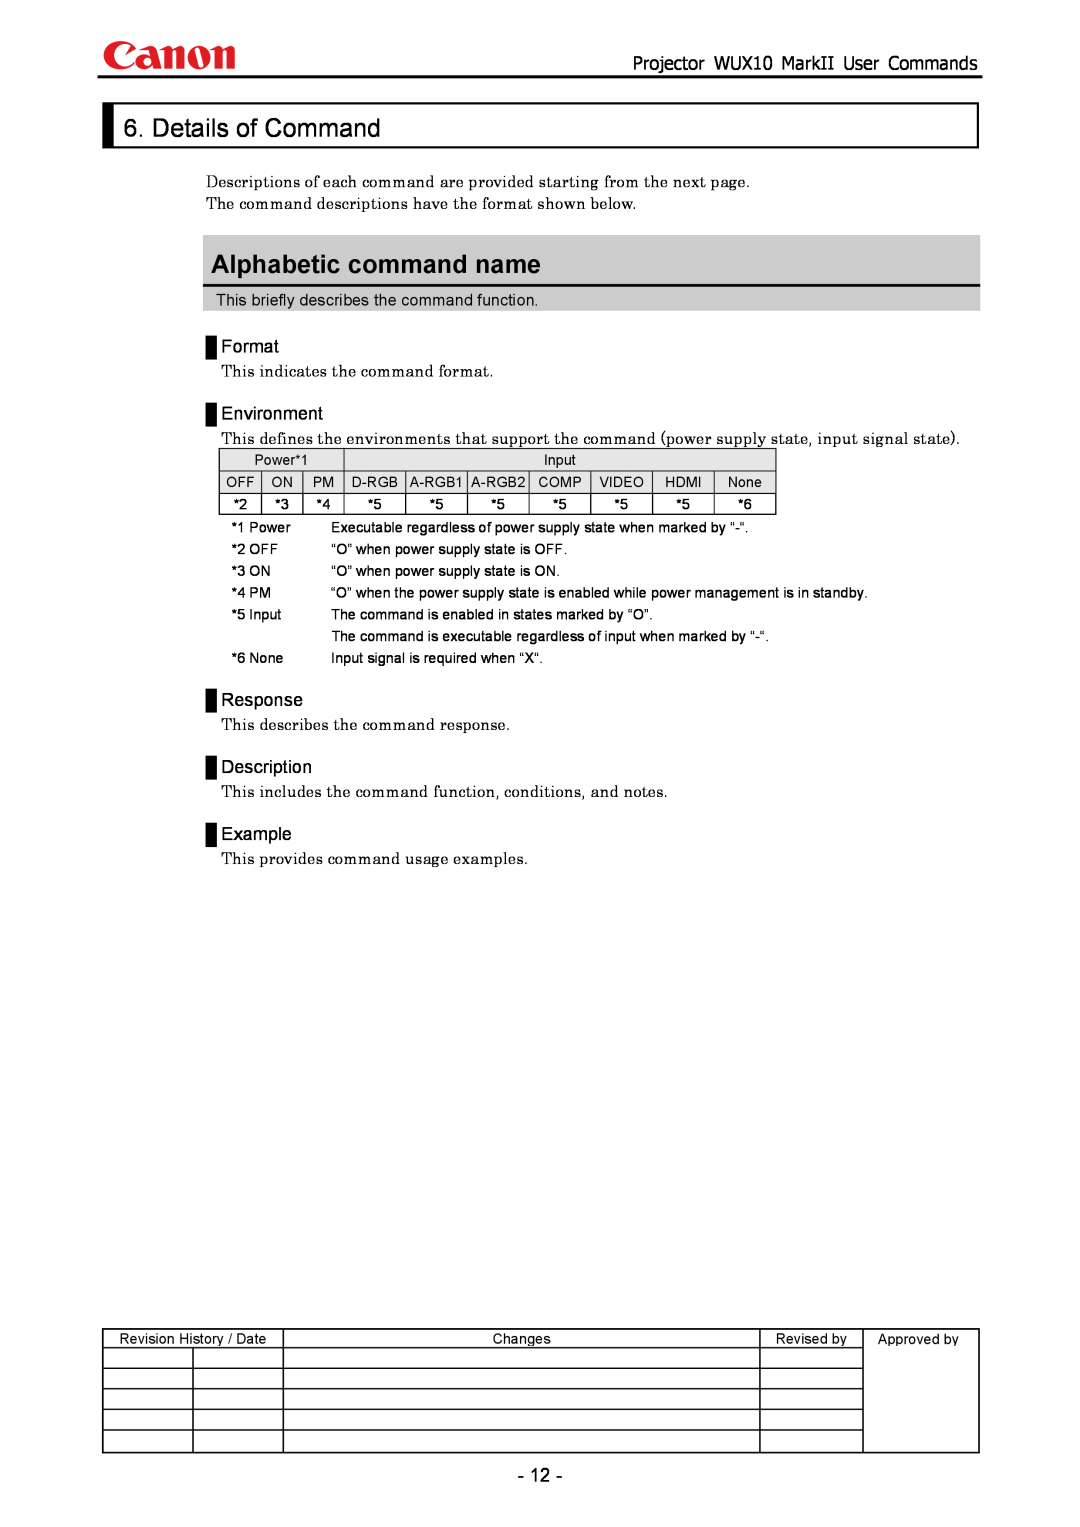 Canon WUX10 manual Details of Command, Alphabetic command name, Format, Environment, Response, Description, Example 